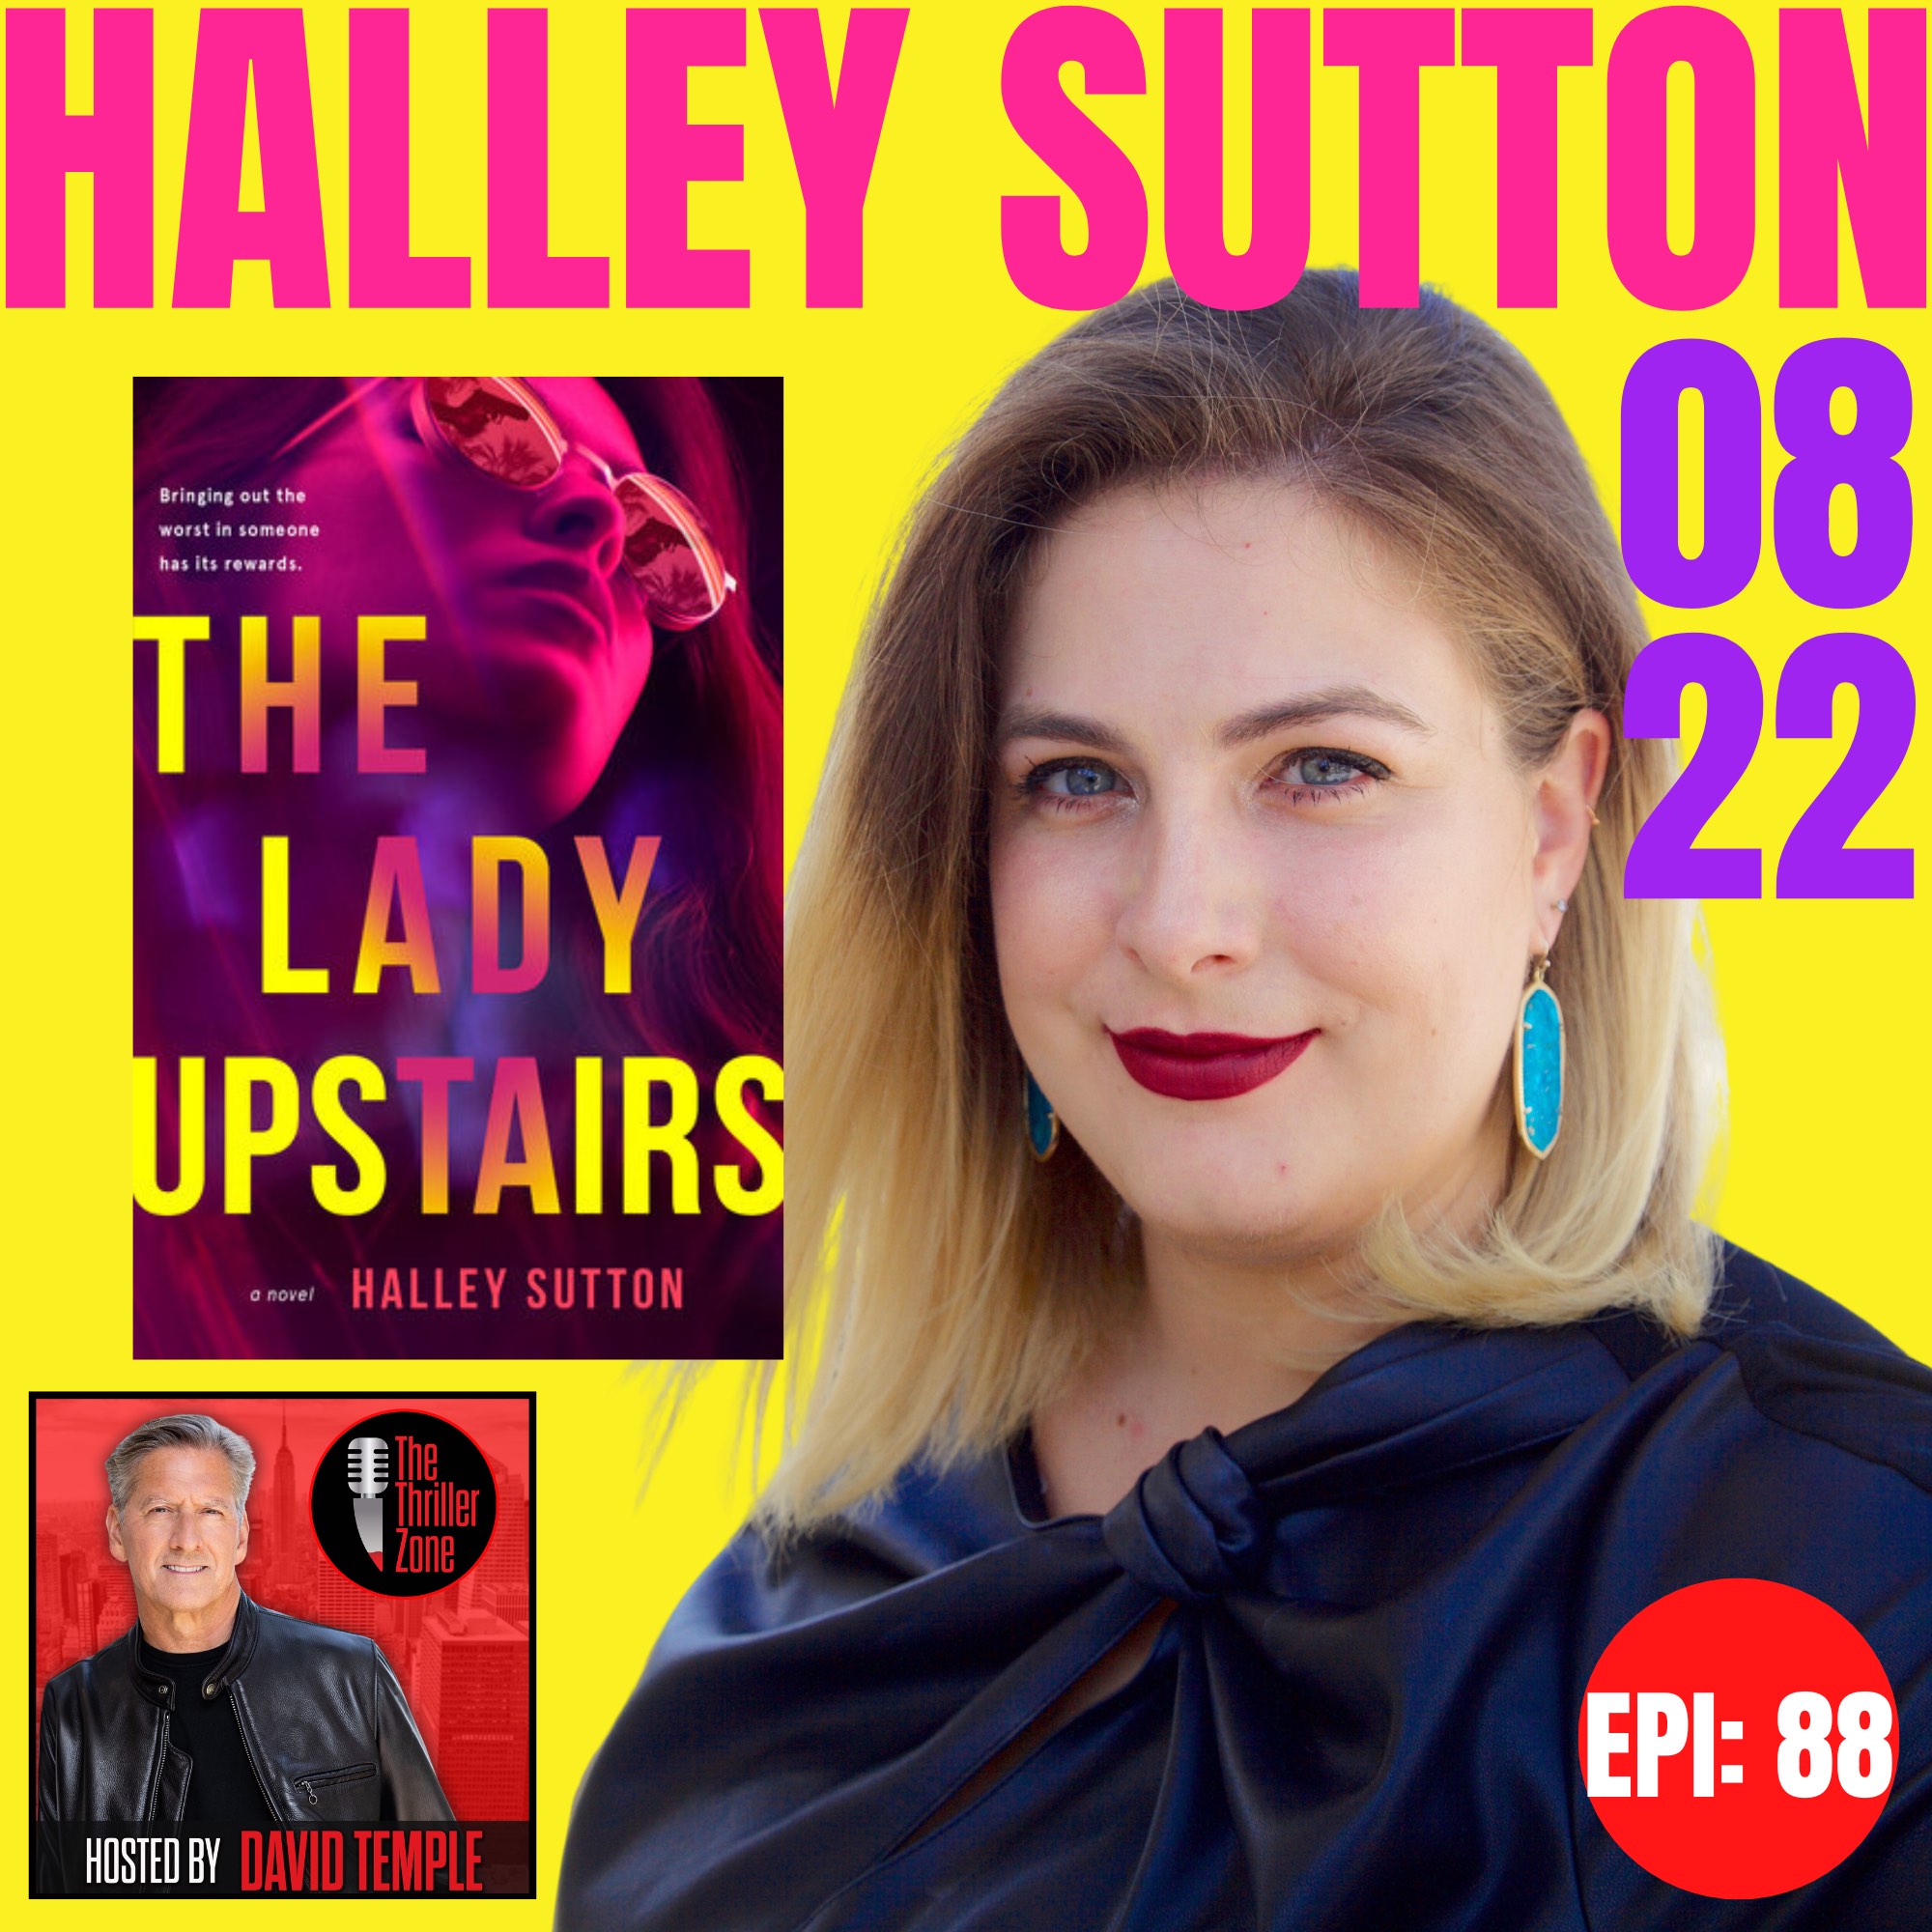 Halley Sutton, author of The Lady Upstairs Image